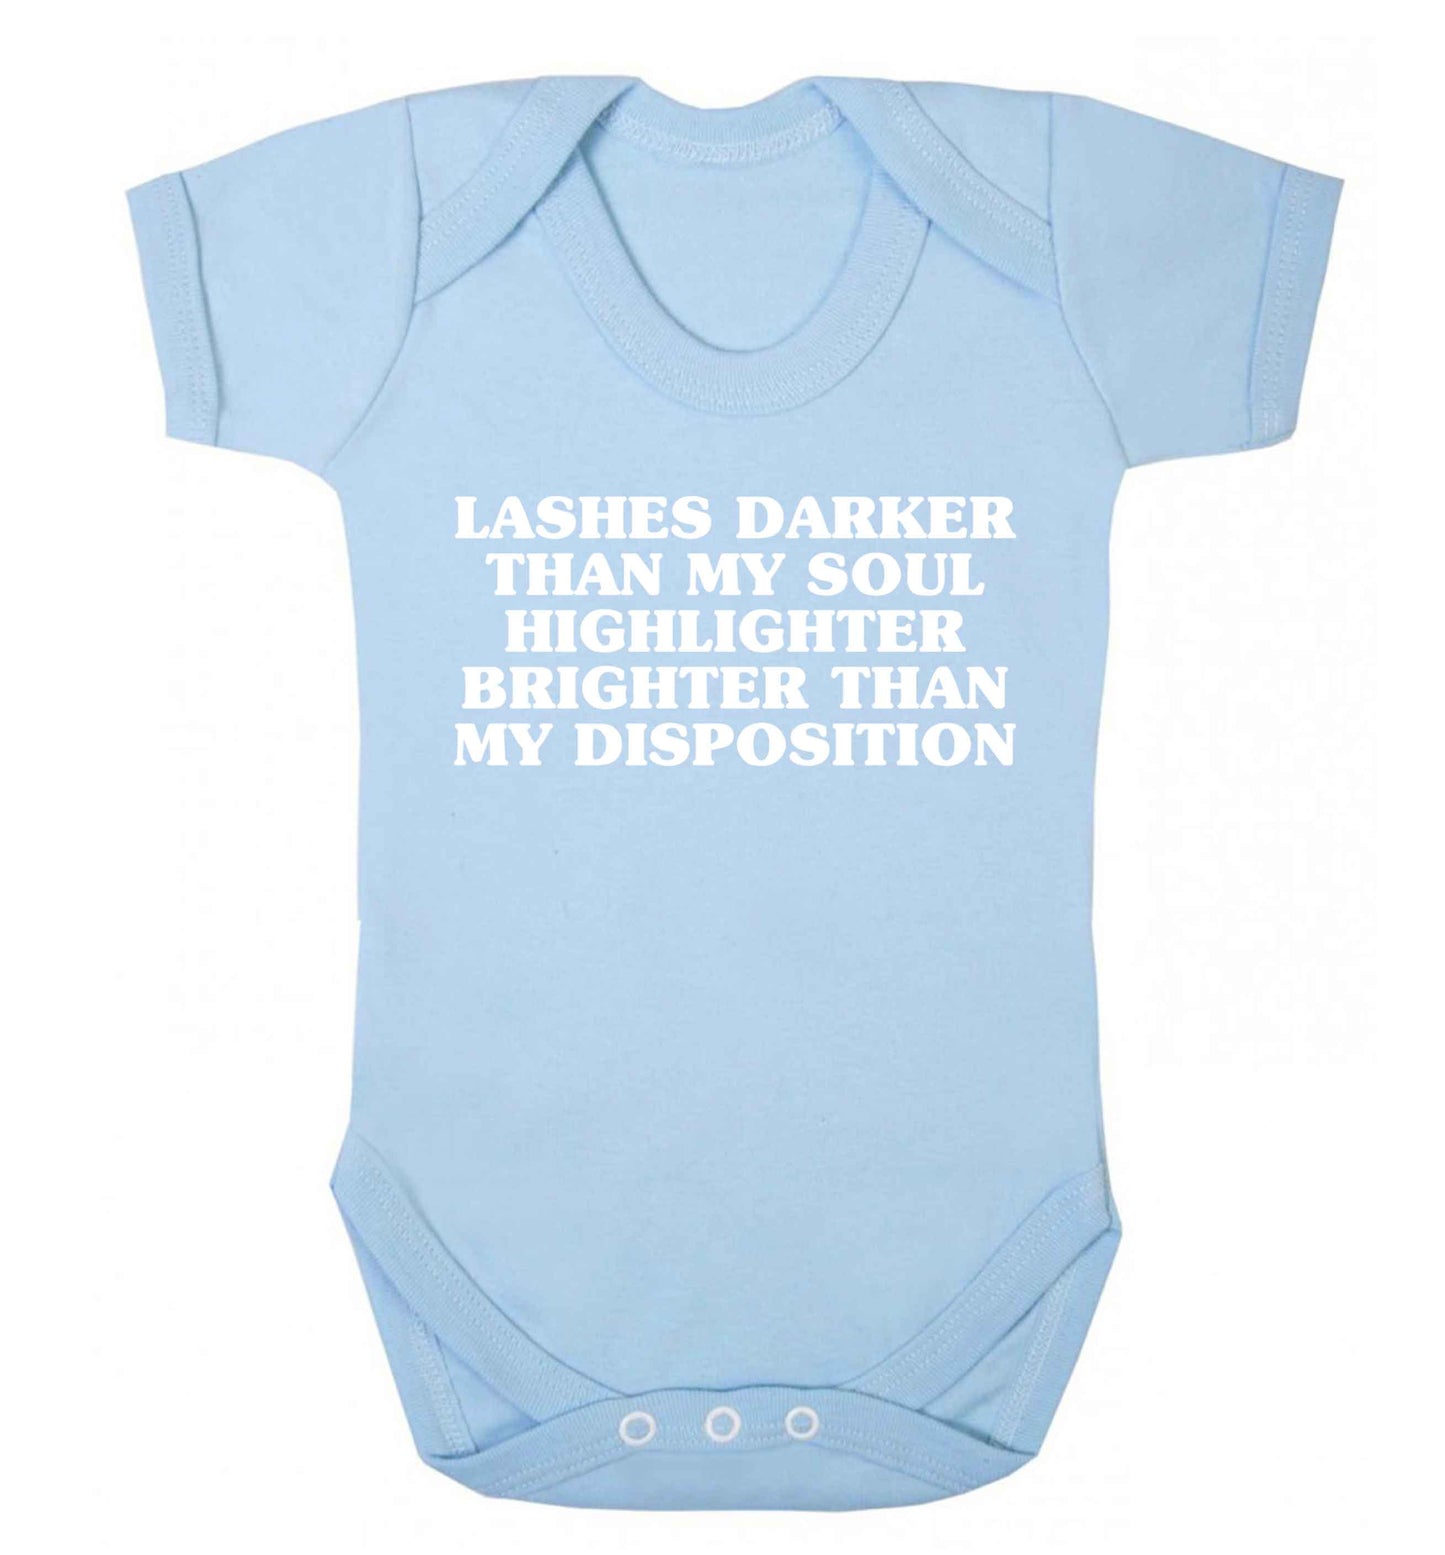 Lashes darker than my soul, highlighter brighter than my disposition Baby Vest pale blue 18-24 months